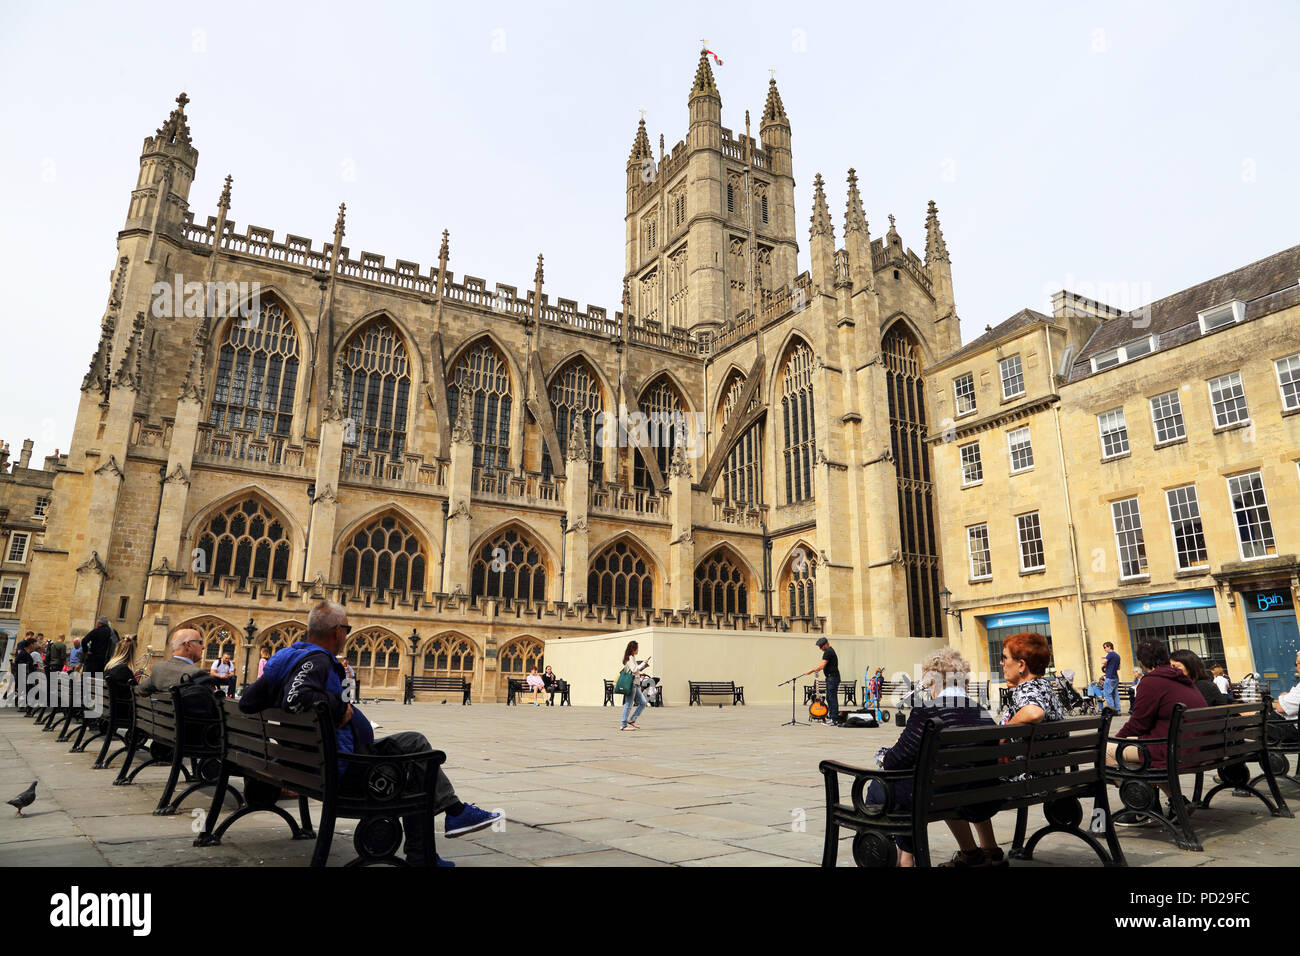 The Abbey Church of Saint Peter and Saint Paul, Bath, commonly known as Bath Abbey, is an Anglican parish church and a former Benedictine monastery lo Stock Photo